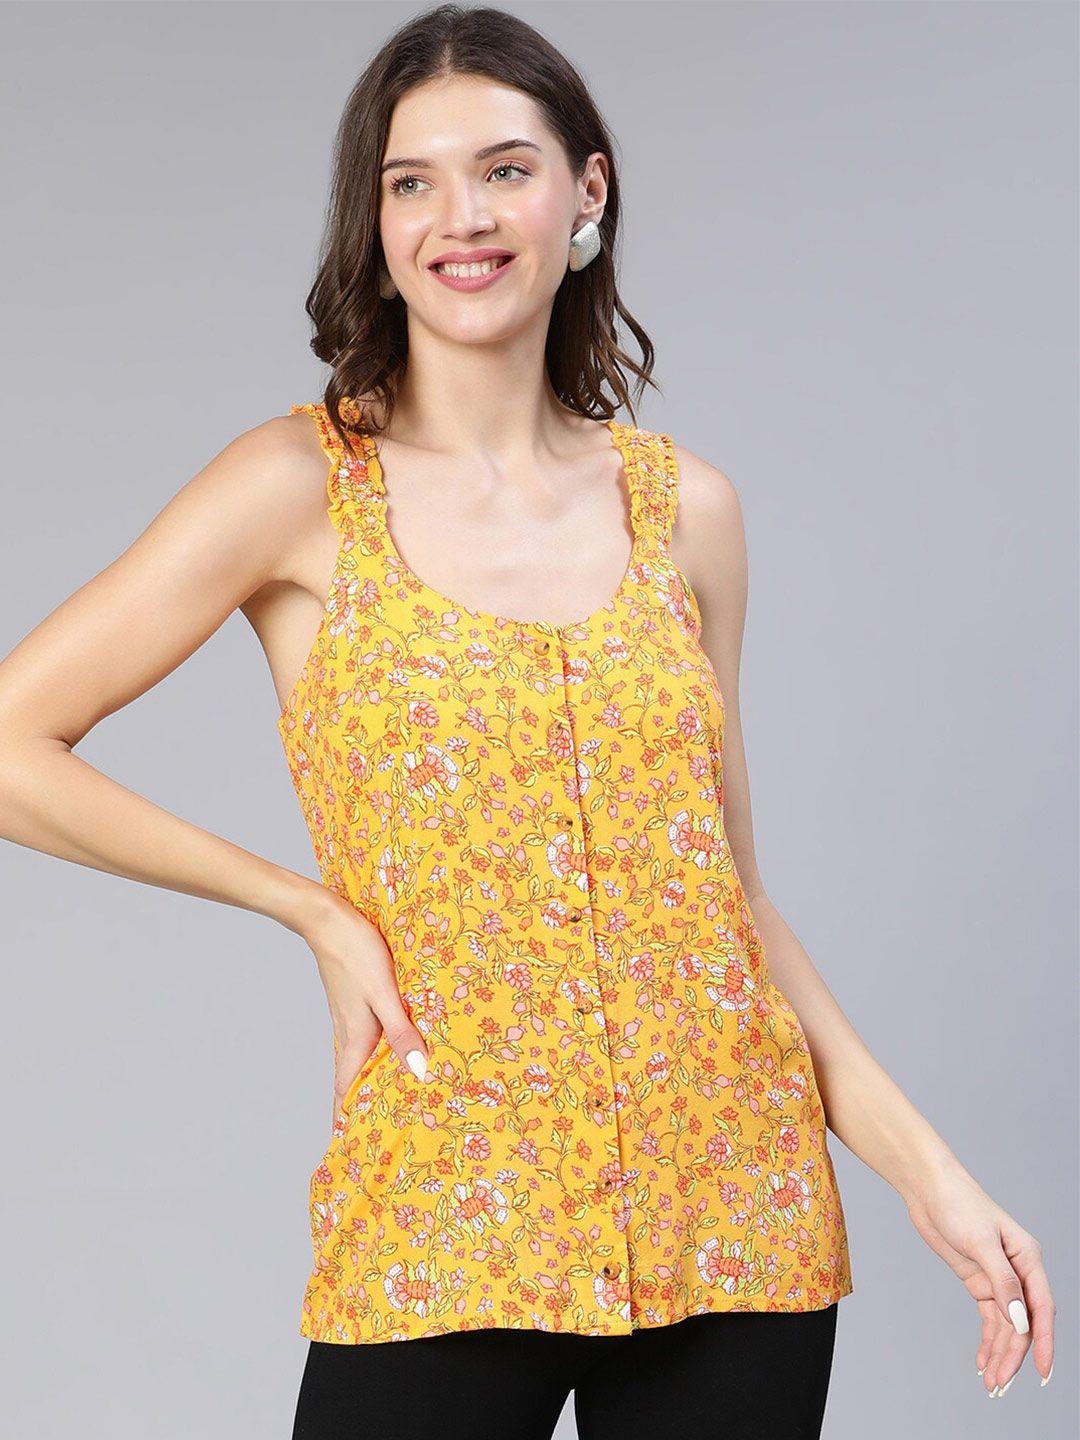 oxolloxo-floral-print-crepe-top